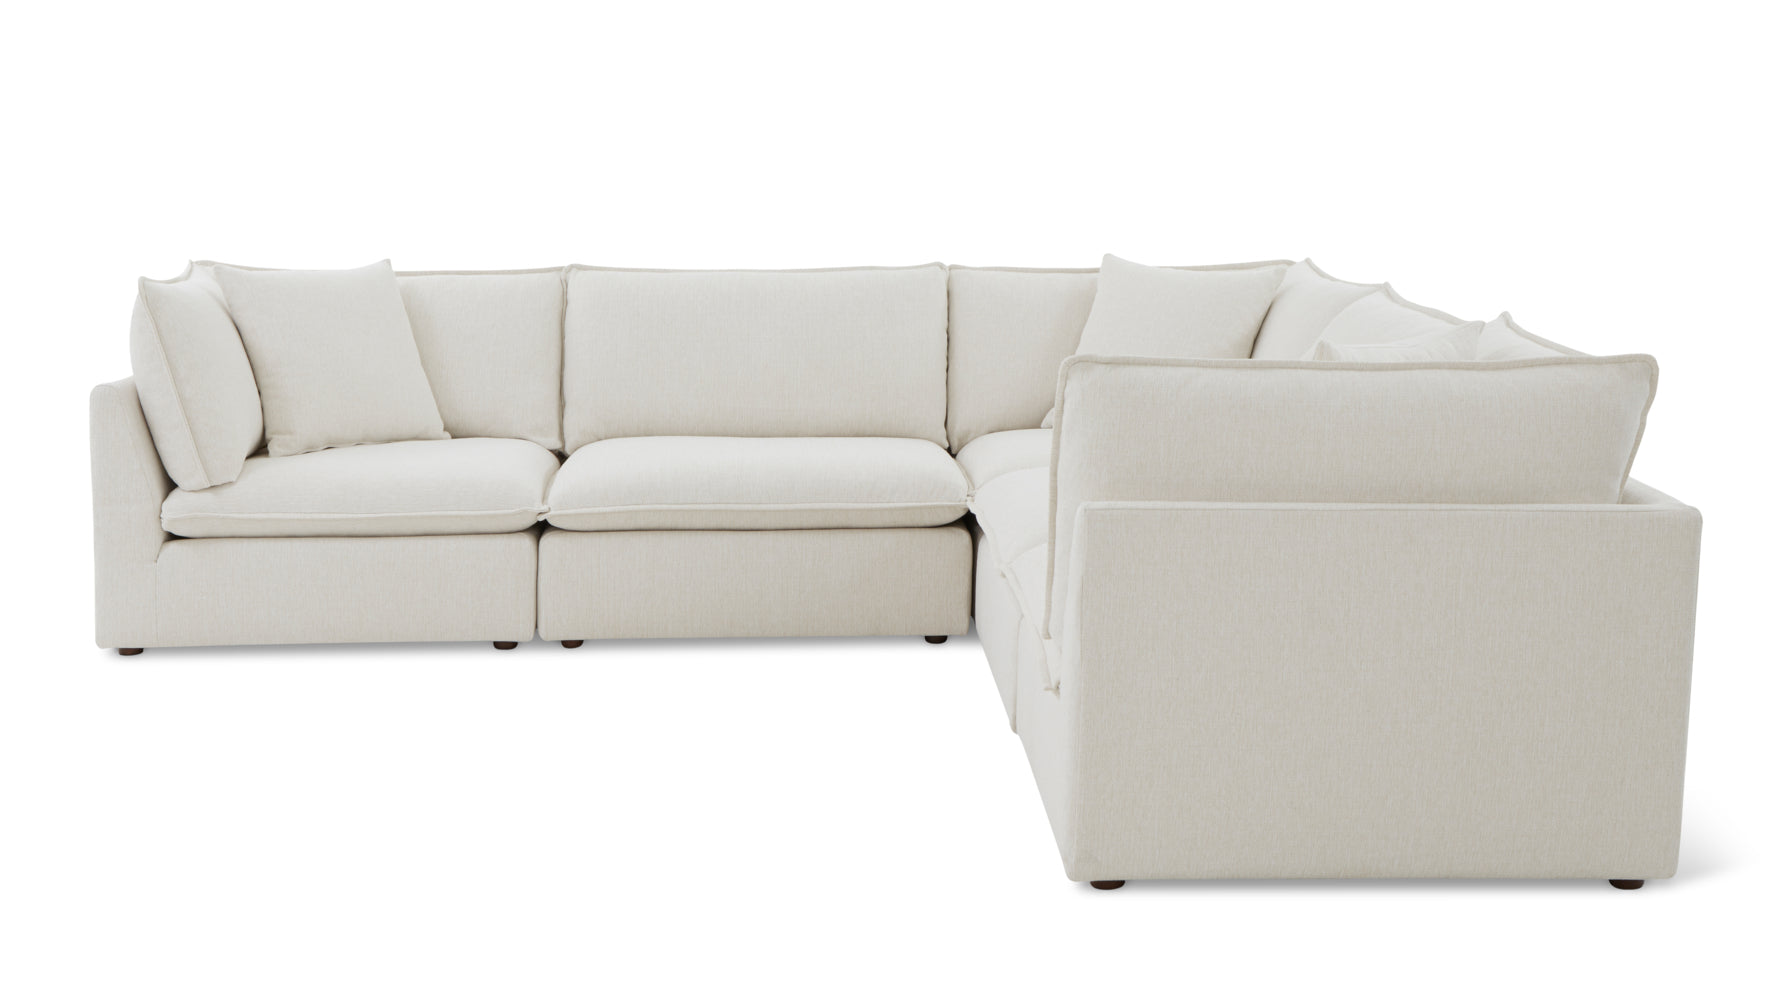 Chill Time 5-Piece Modular Sectional Closed, Birch - Image 1